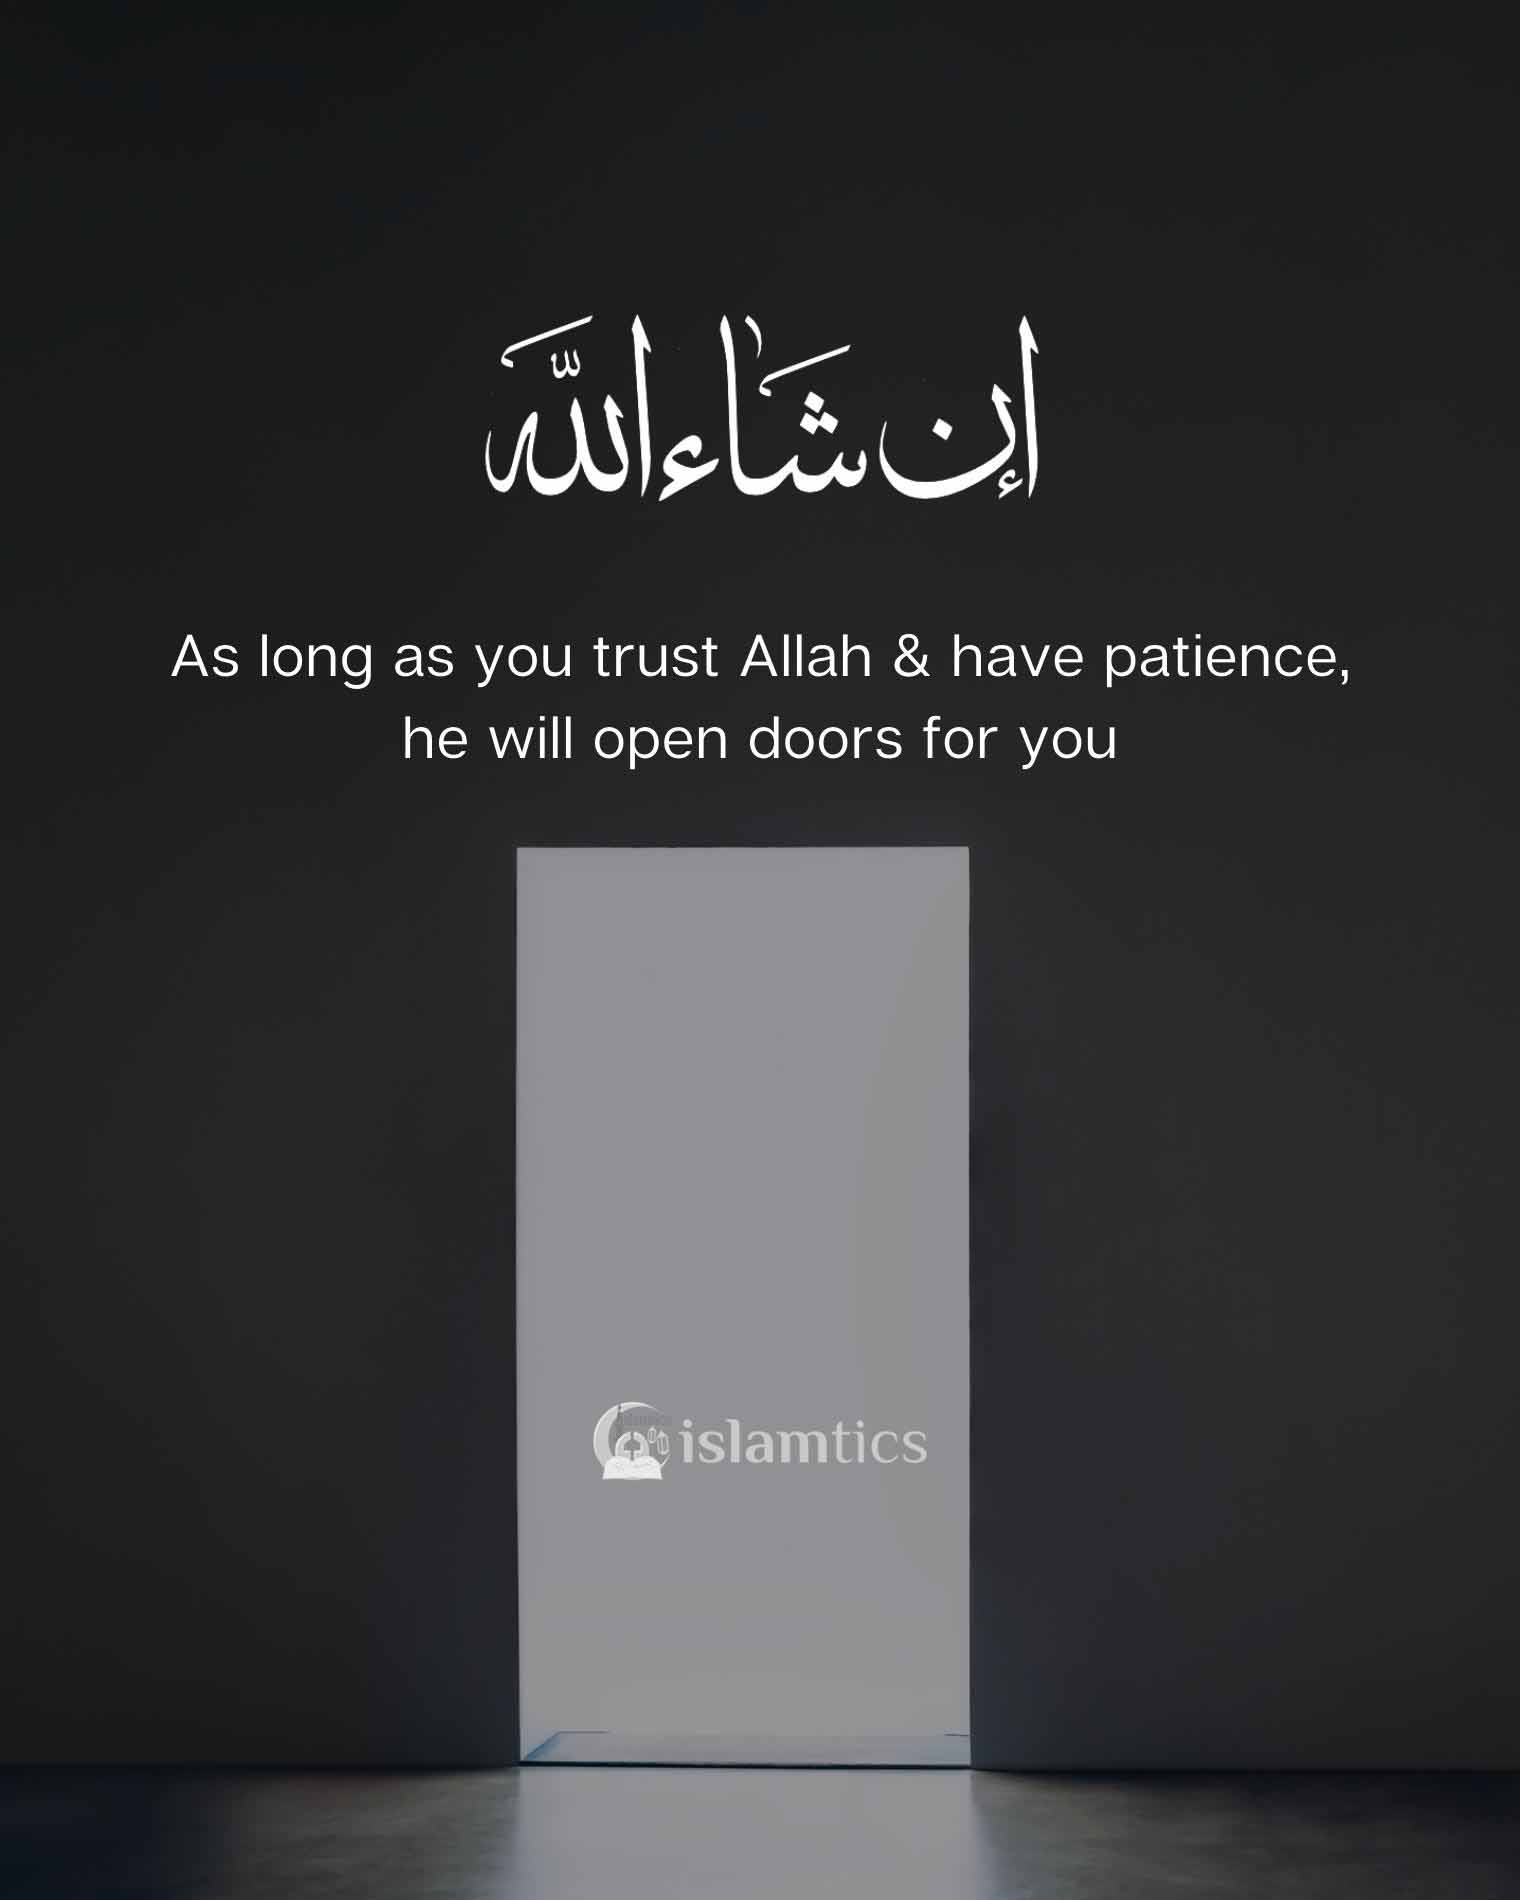 As long as you trust Allah & have patience, He will open doors for you